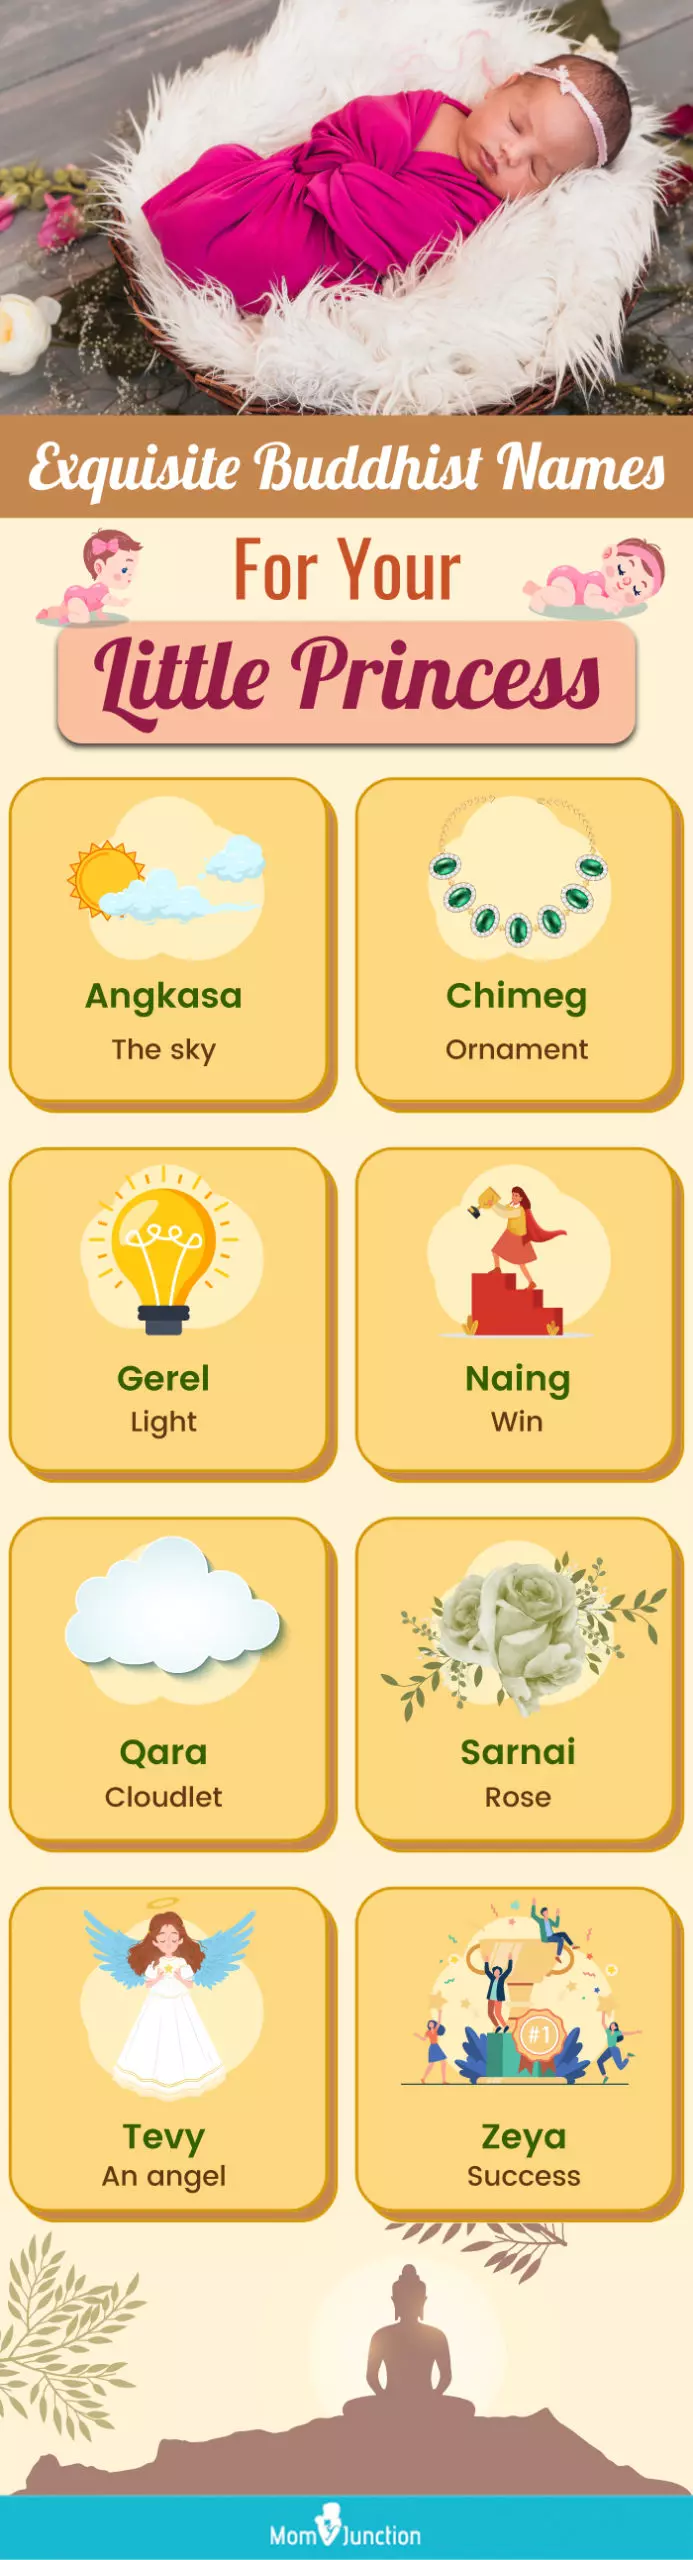 exquisite buddhist names for your little princess (infographic)